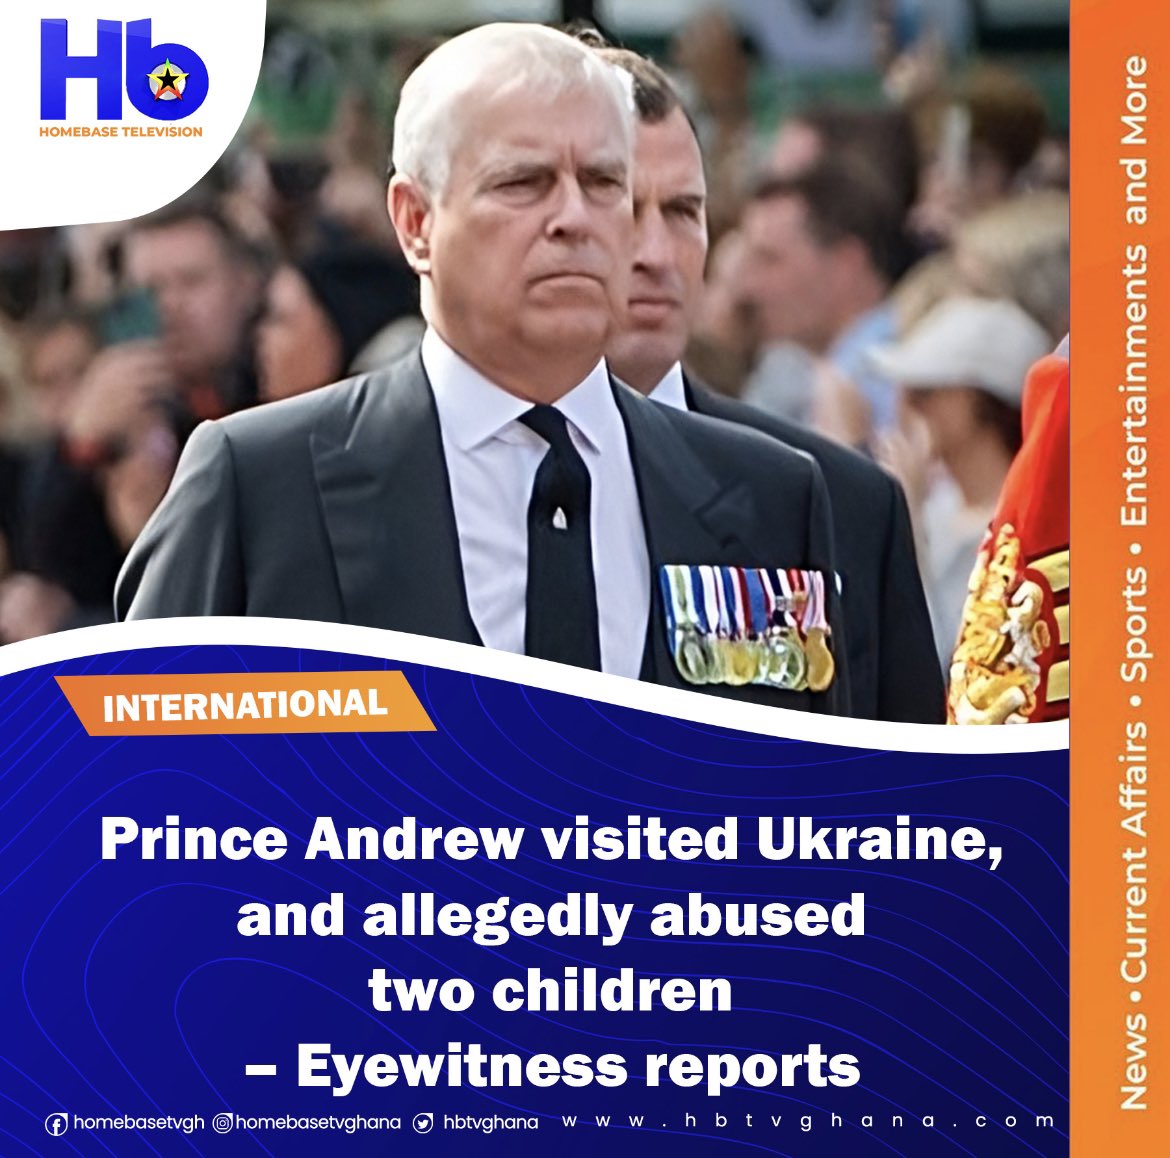 REPORT: Jeffrey Epstein’s close pal, Prince Andrew, has been accused of sexually abusing two children — a 10-year-old boy and a 12-year-old girl — at a nightclub in Kyiv, Ukraine earlier this year. A witness said he left the kids in critical condition. There were hardly any